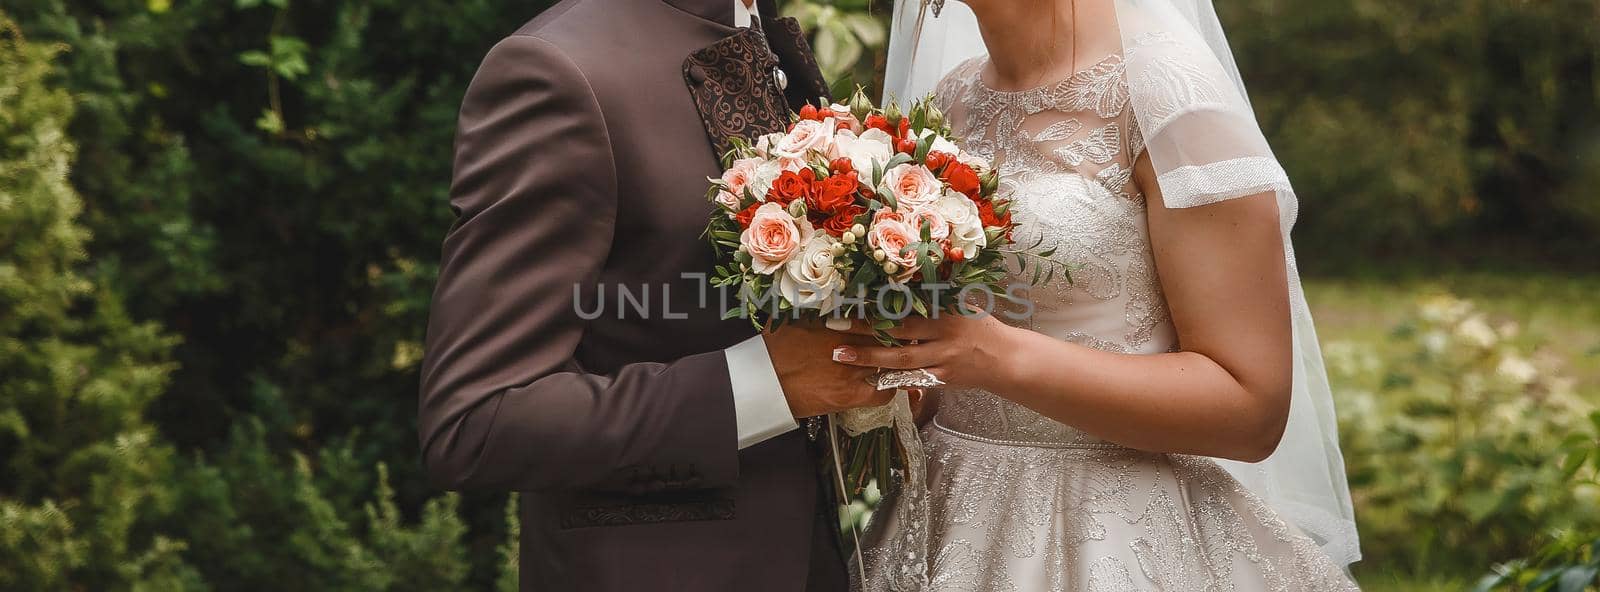 The bride and groom hold together with their hands a wedding bouquet of flowers.